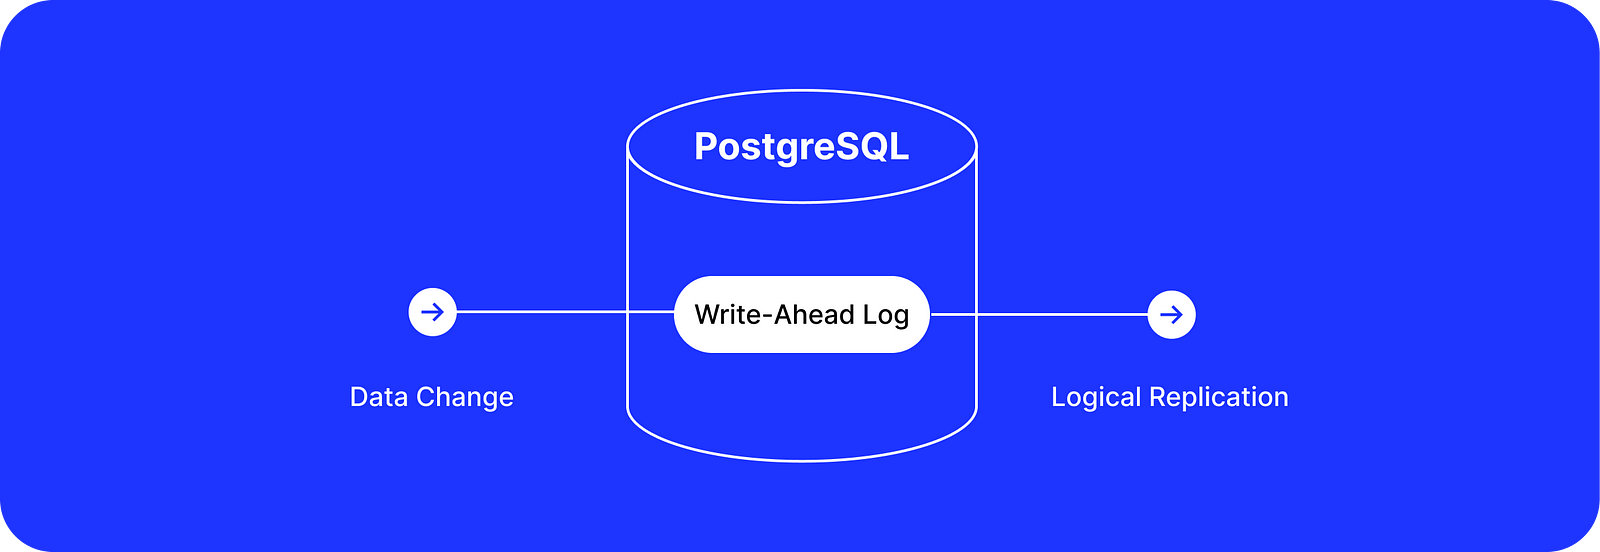 The Ultimate Guide to PostgreSQL Data Change Tracking